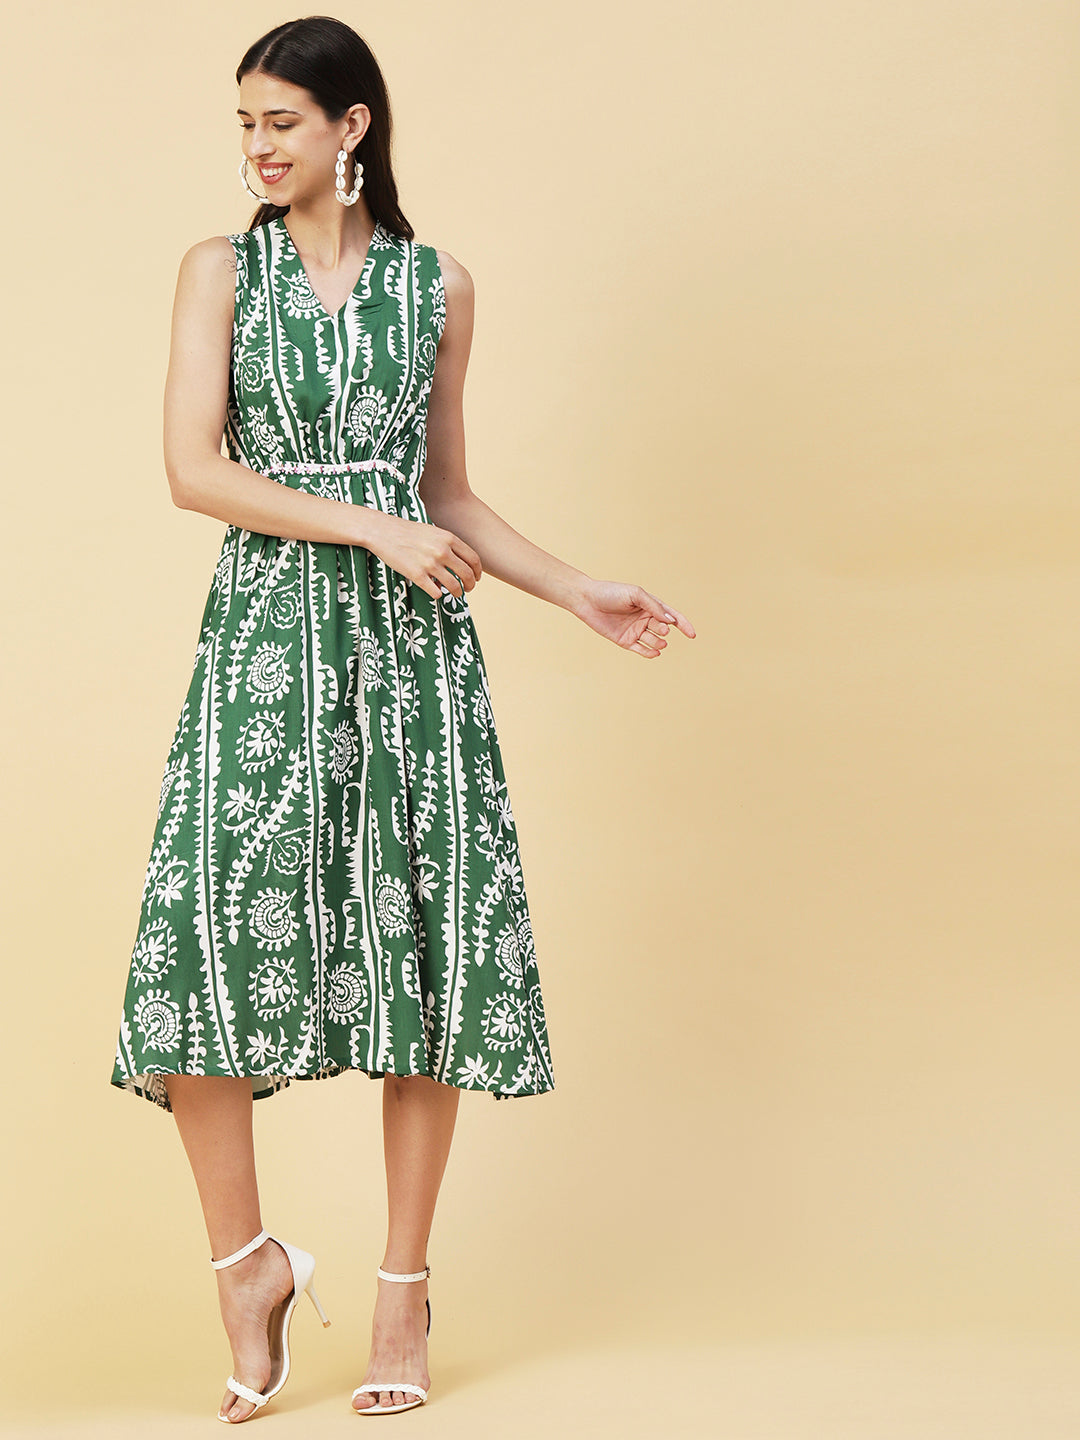 Ethnic Stripes Printed A-Line Fit & Flare Midi Dress - Green